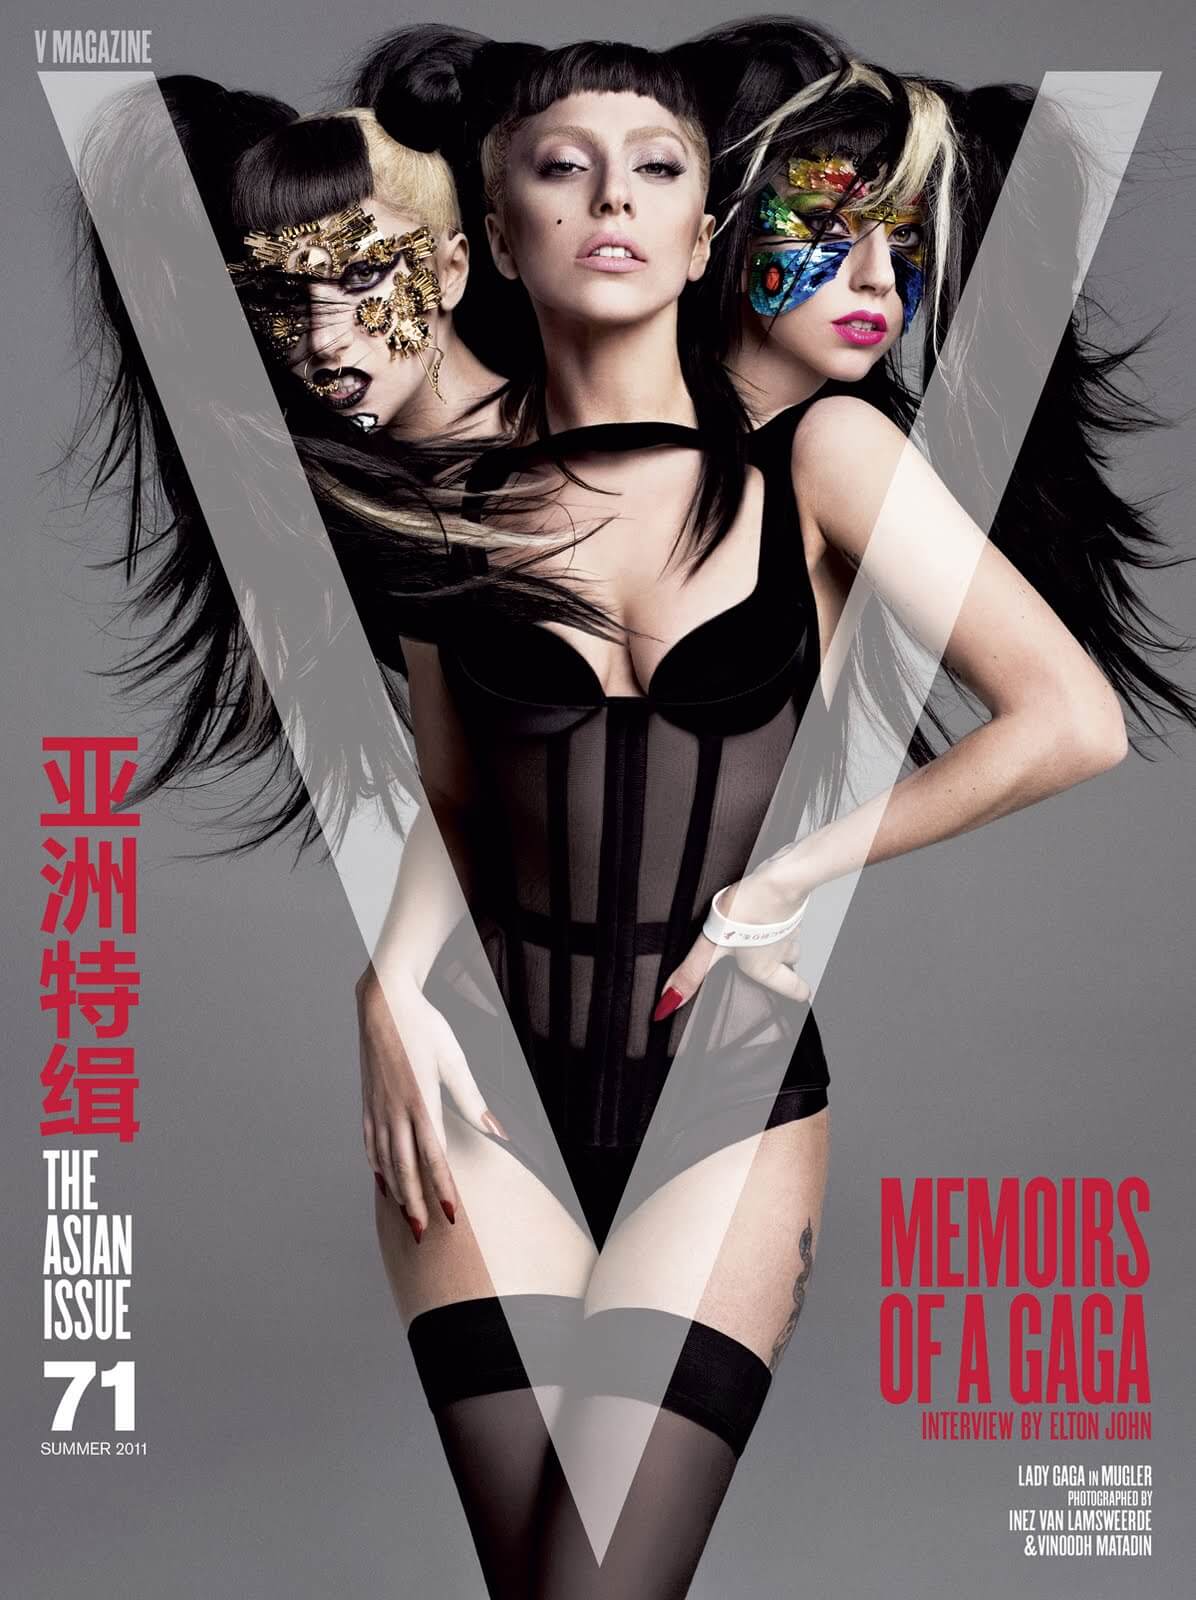 Lady Gaga's 3-headed Cover for V Magazine Issue 71: The Asian Issue (Summer 2011)